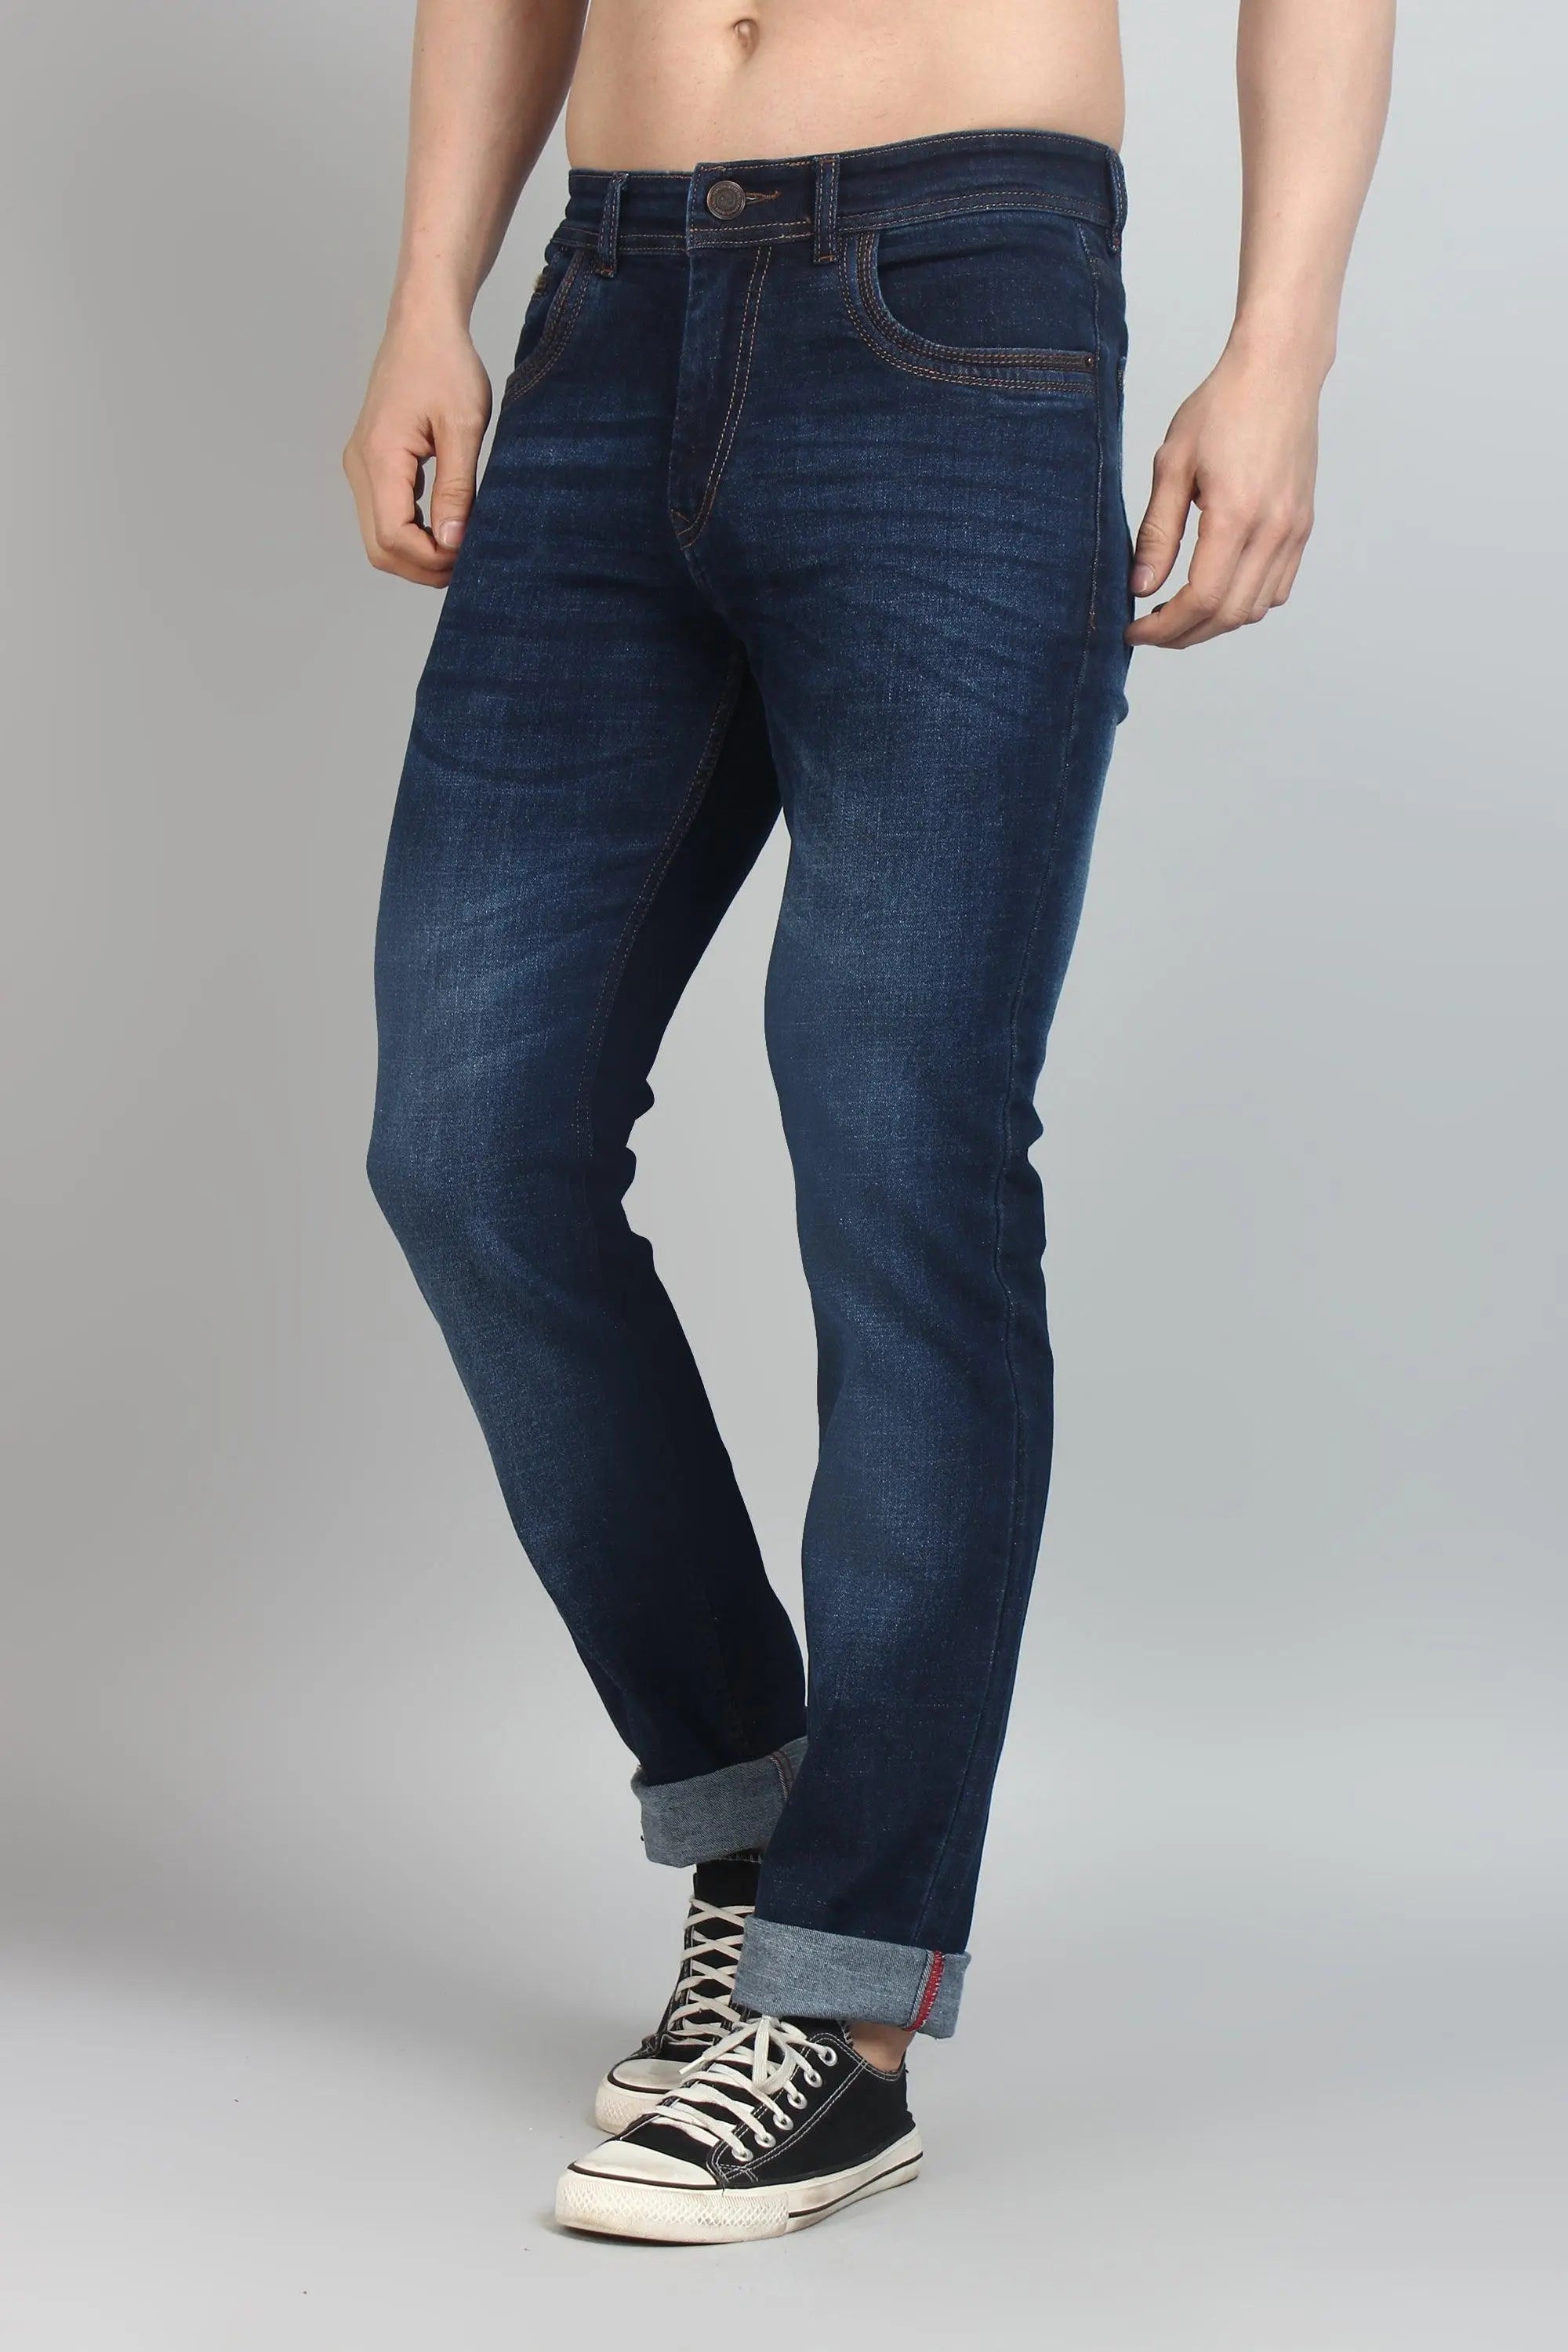 Levis Blue Denim Jeans, Pattern : Faded, Ripped, Rugged, Age Group : 14- 35  at Rs 510 / Piece in Rewa